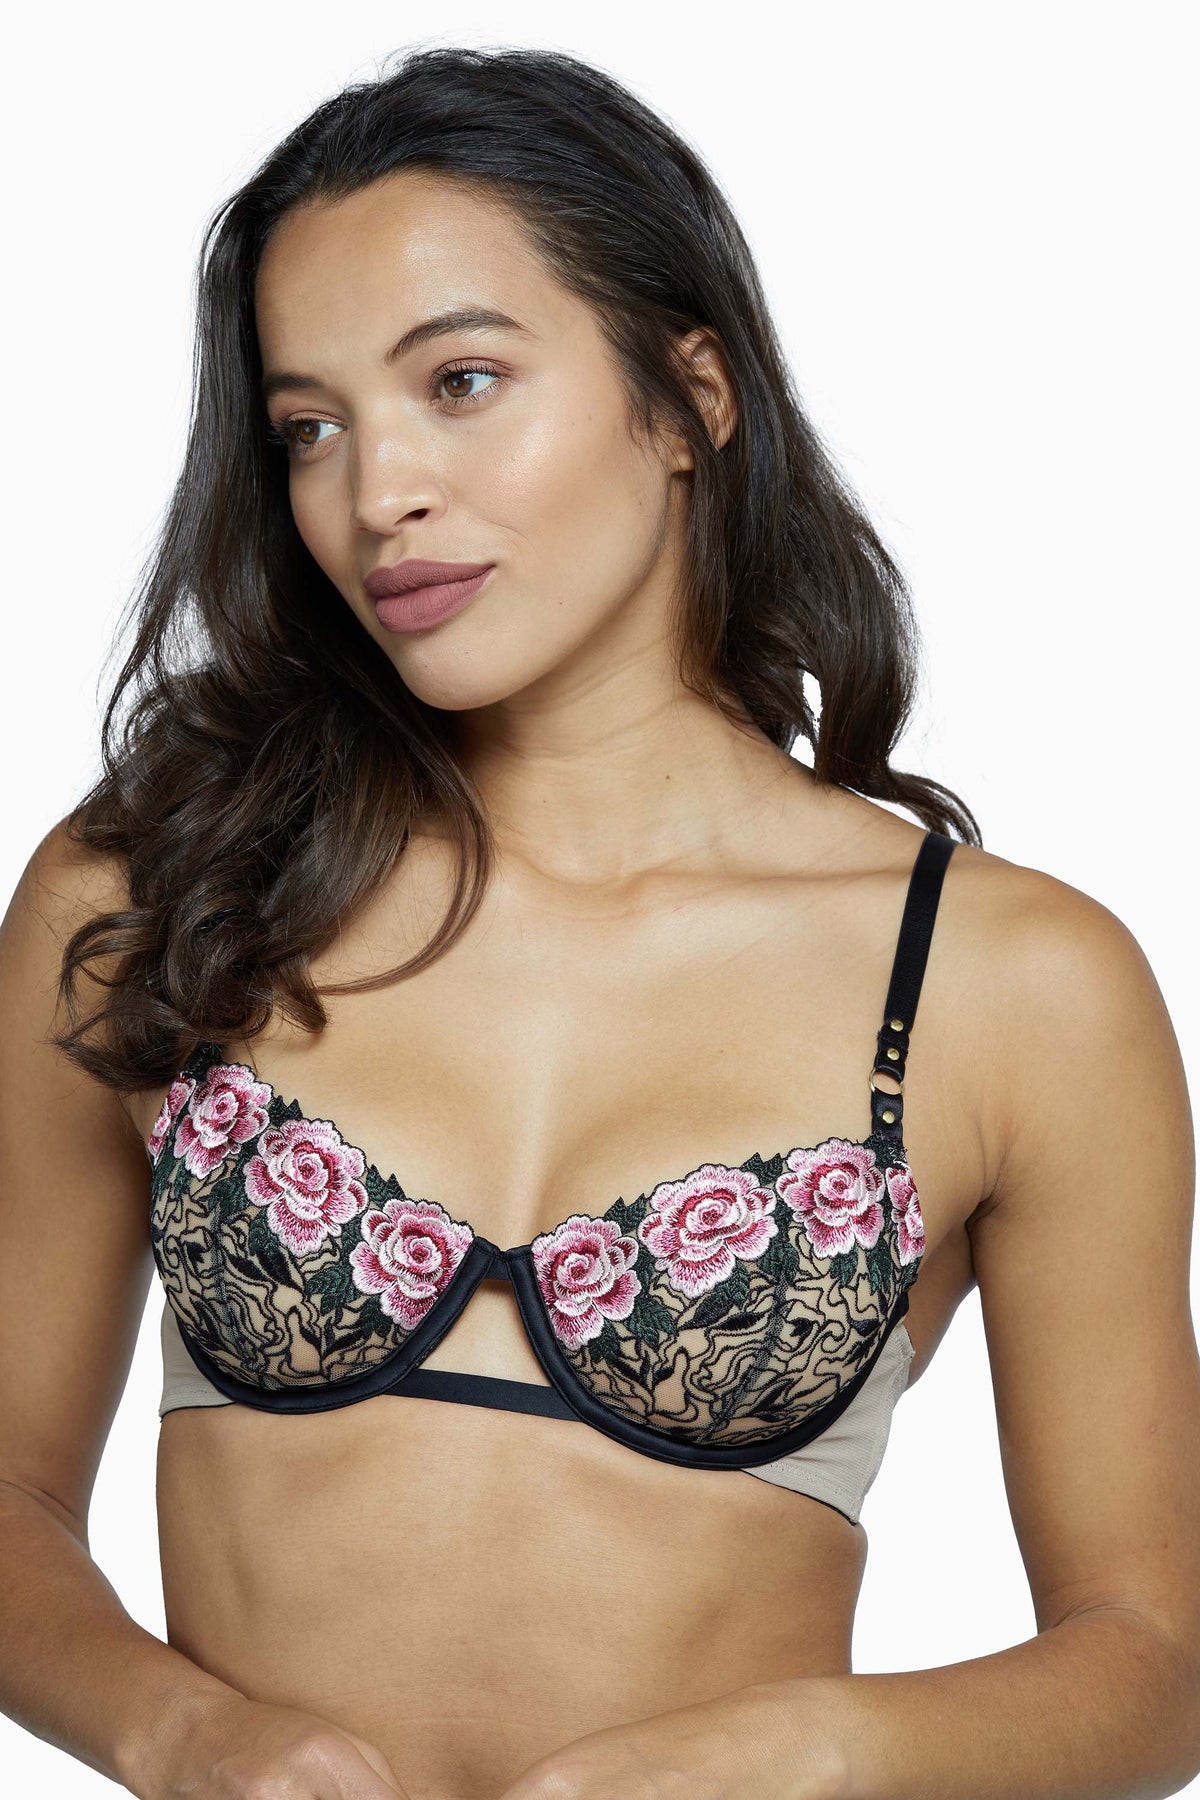 Rose Body for €29.99 - Bodies & Bustiers - Hunkemöller